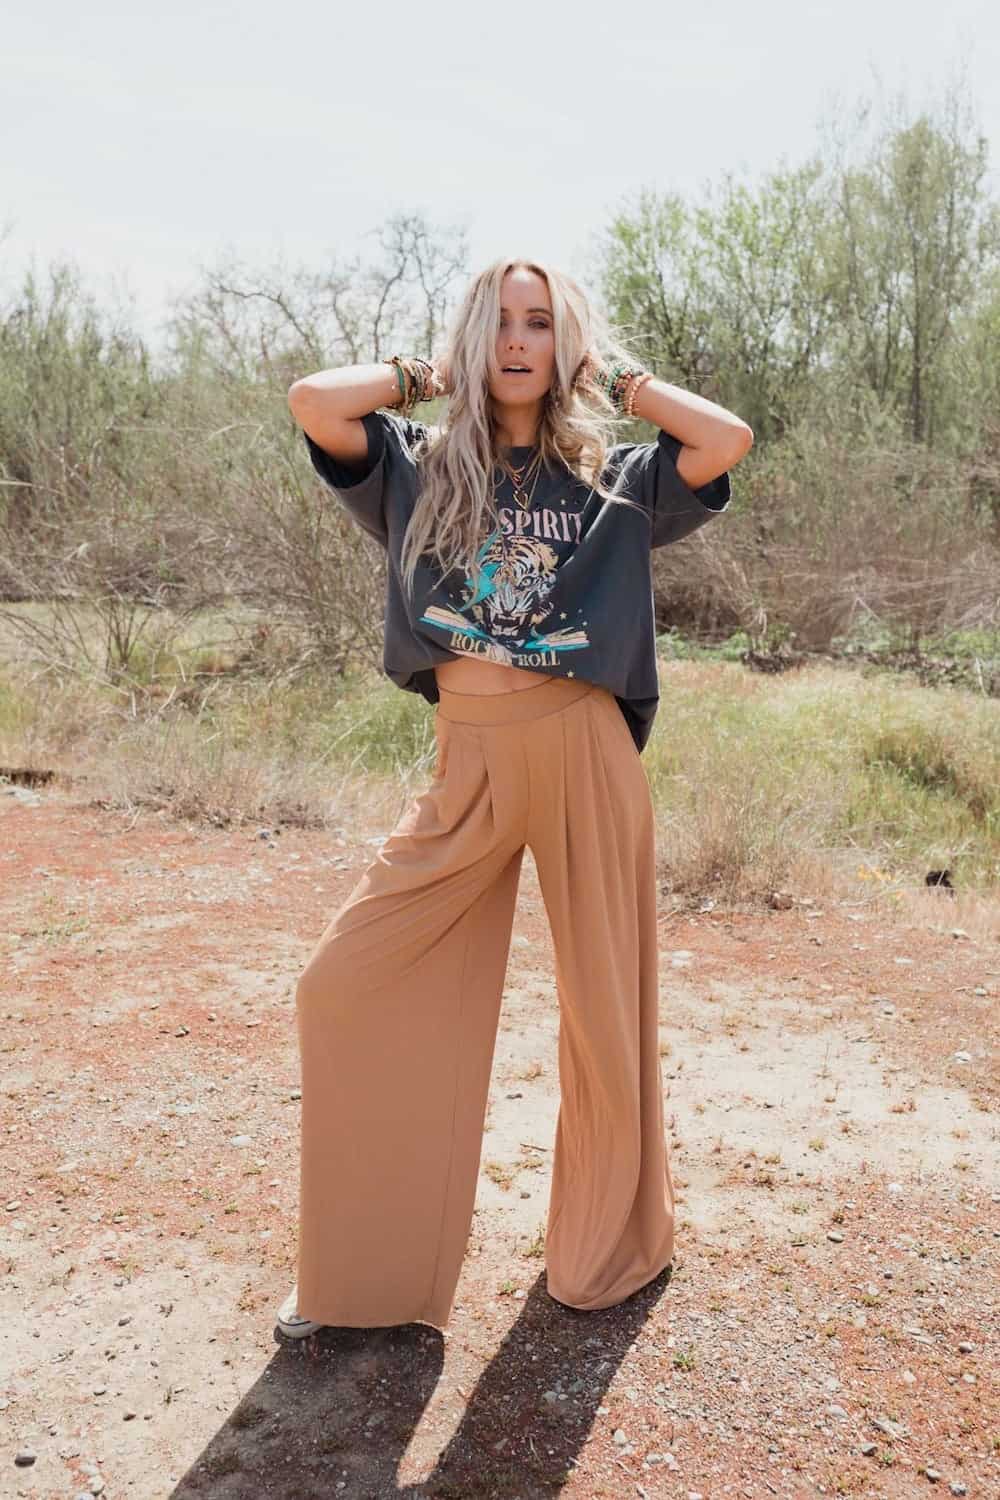 image of a blonde woman wearing wide leg tan pants and a graphic t-shirt in a grassy area